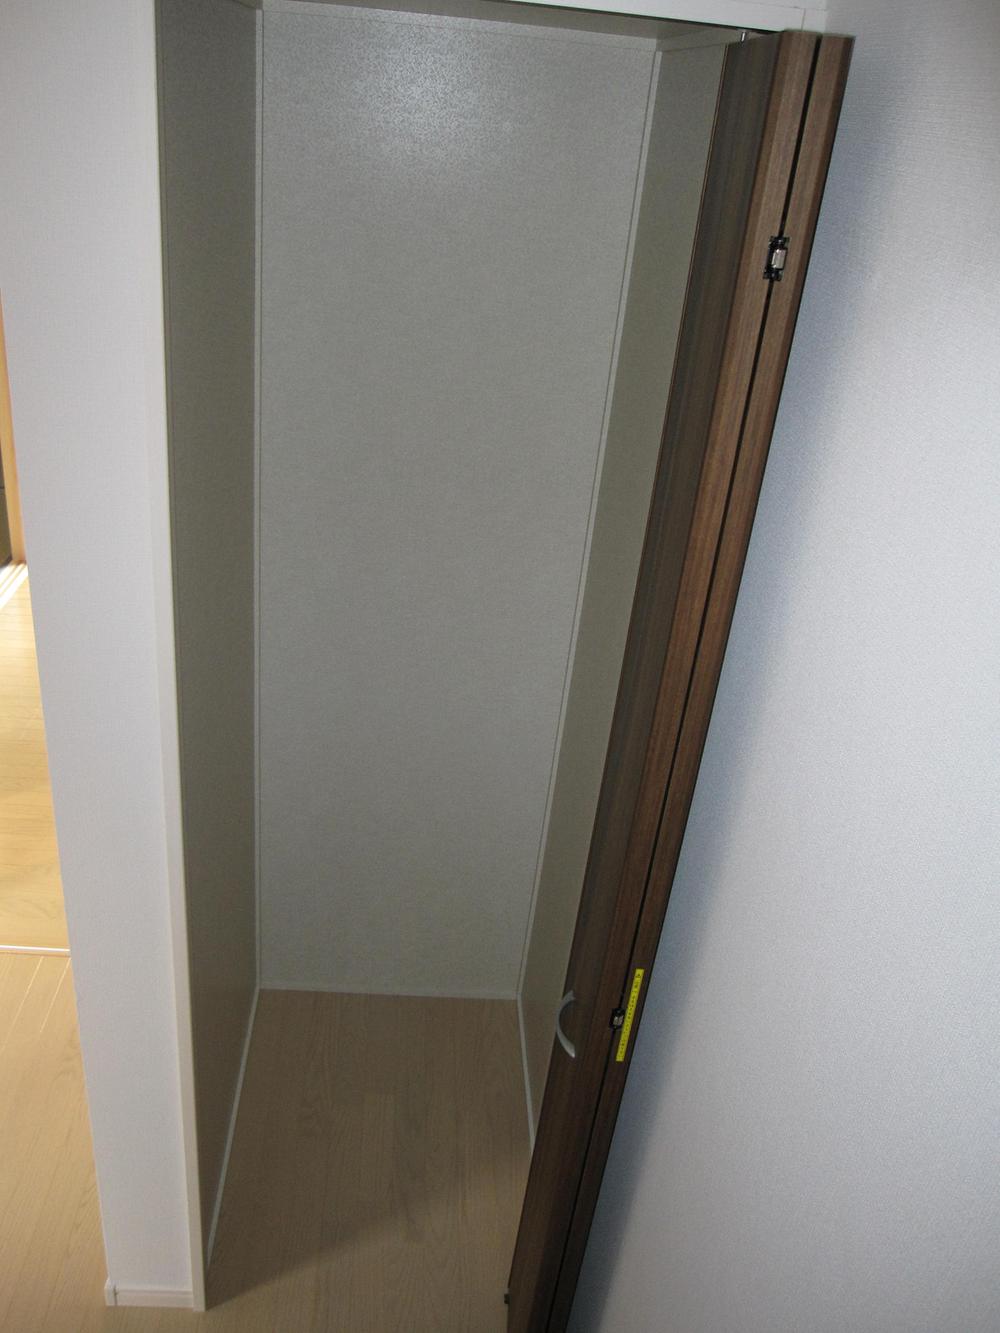 Receipt. You can storage of various size by installing even without a shelf storage in the front door next to.